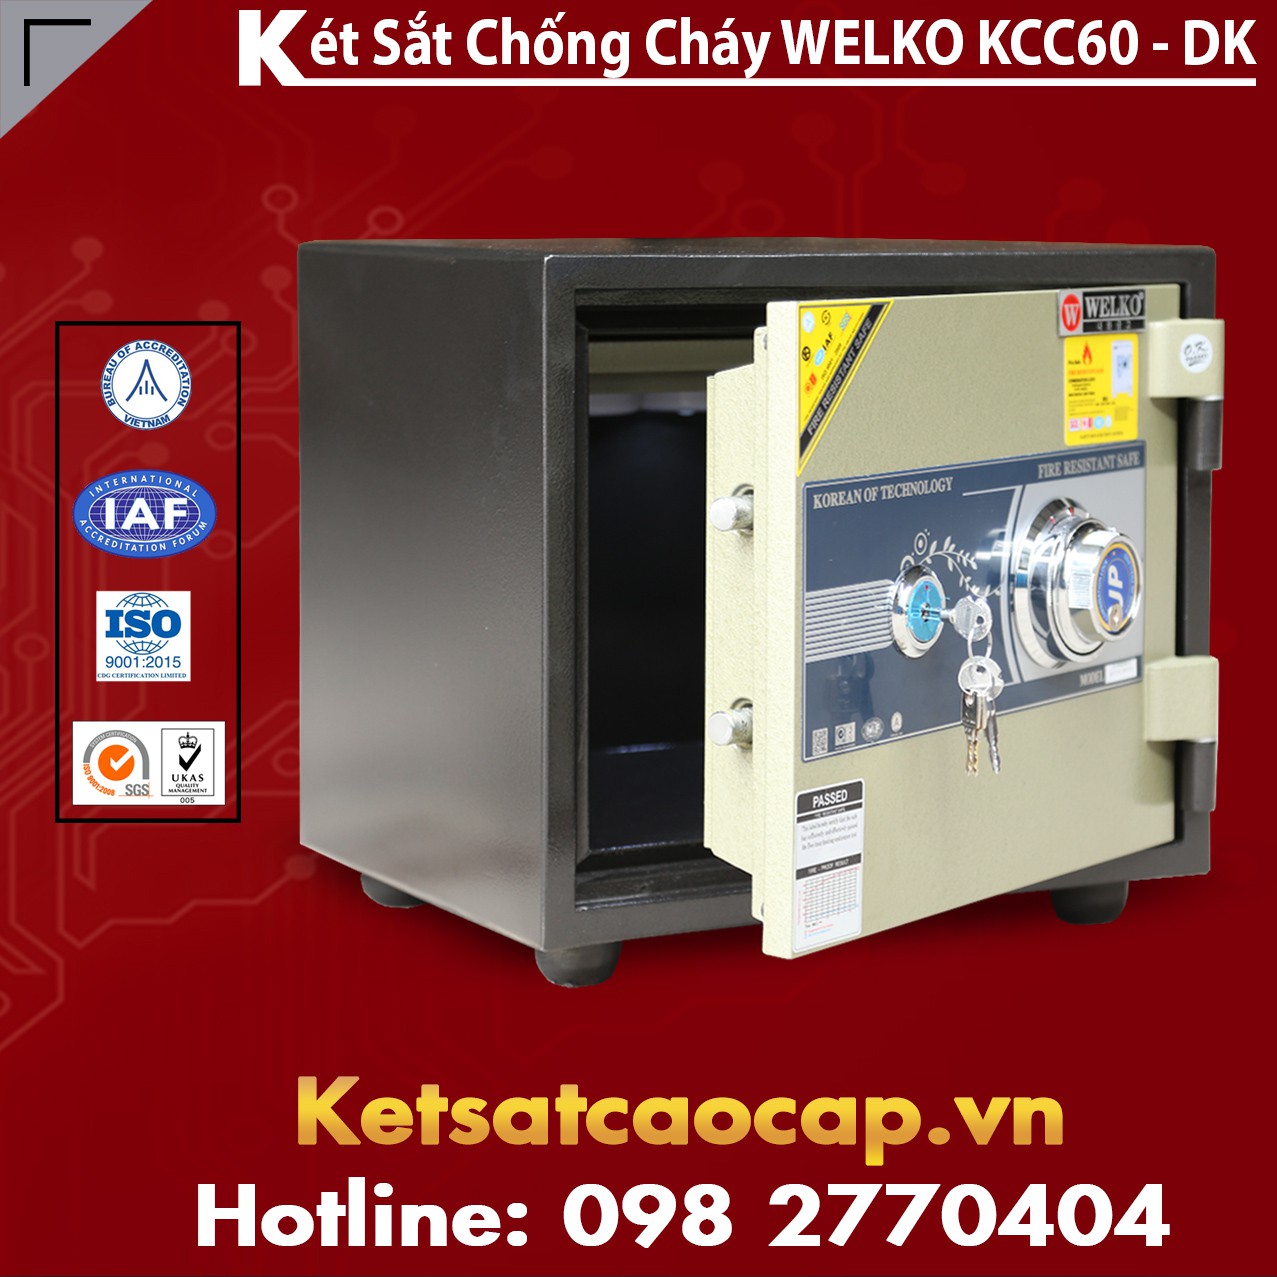 Hotel Safes Deposit Box Suppliers and Exporters Manufacturers & Suppliers Bang Gia Ket Sat Chong Dap Cao Cap